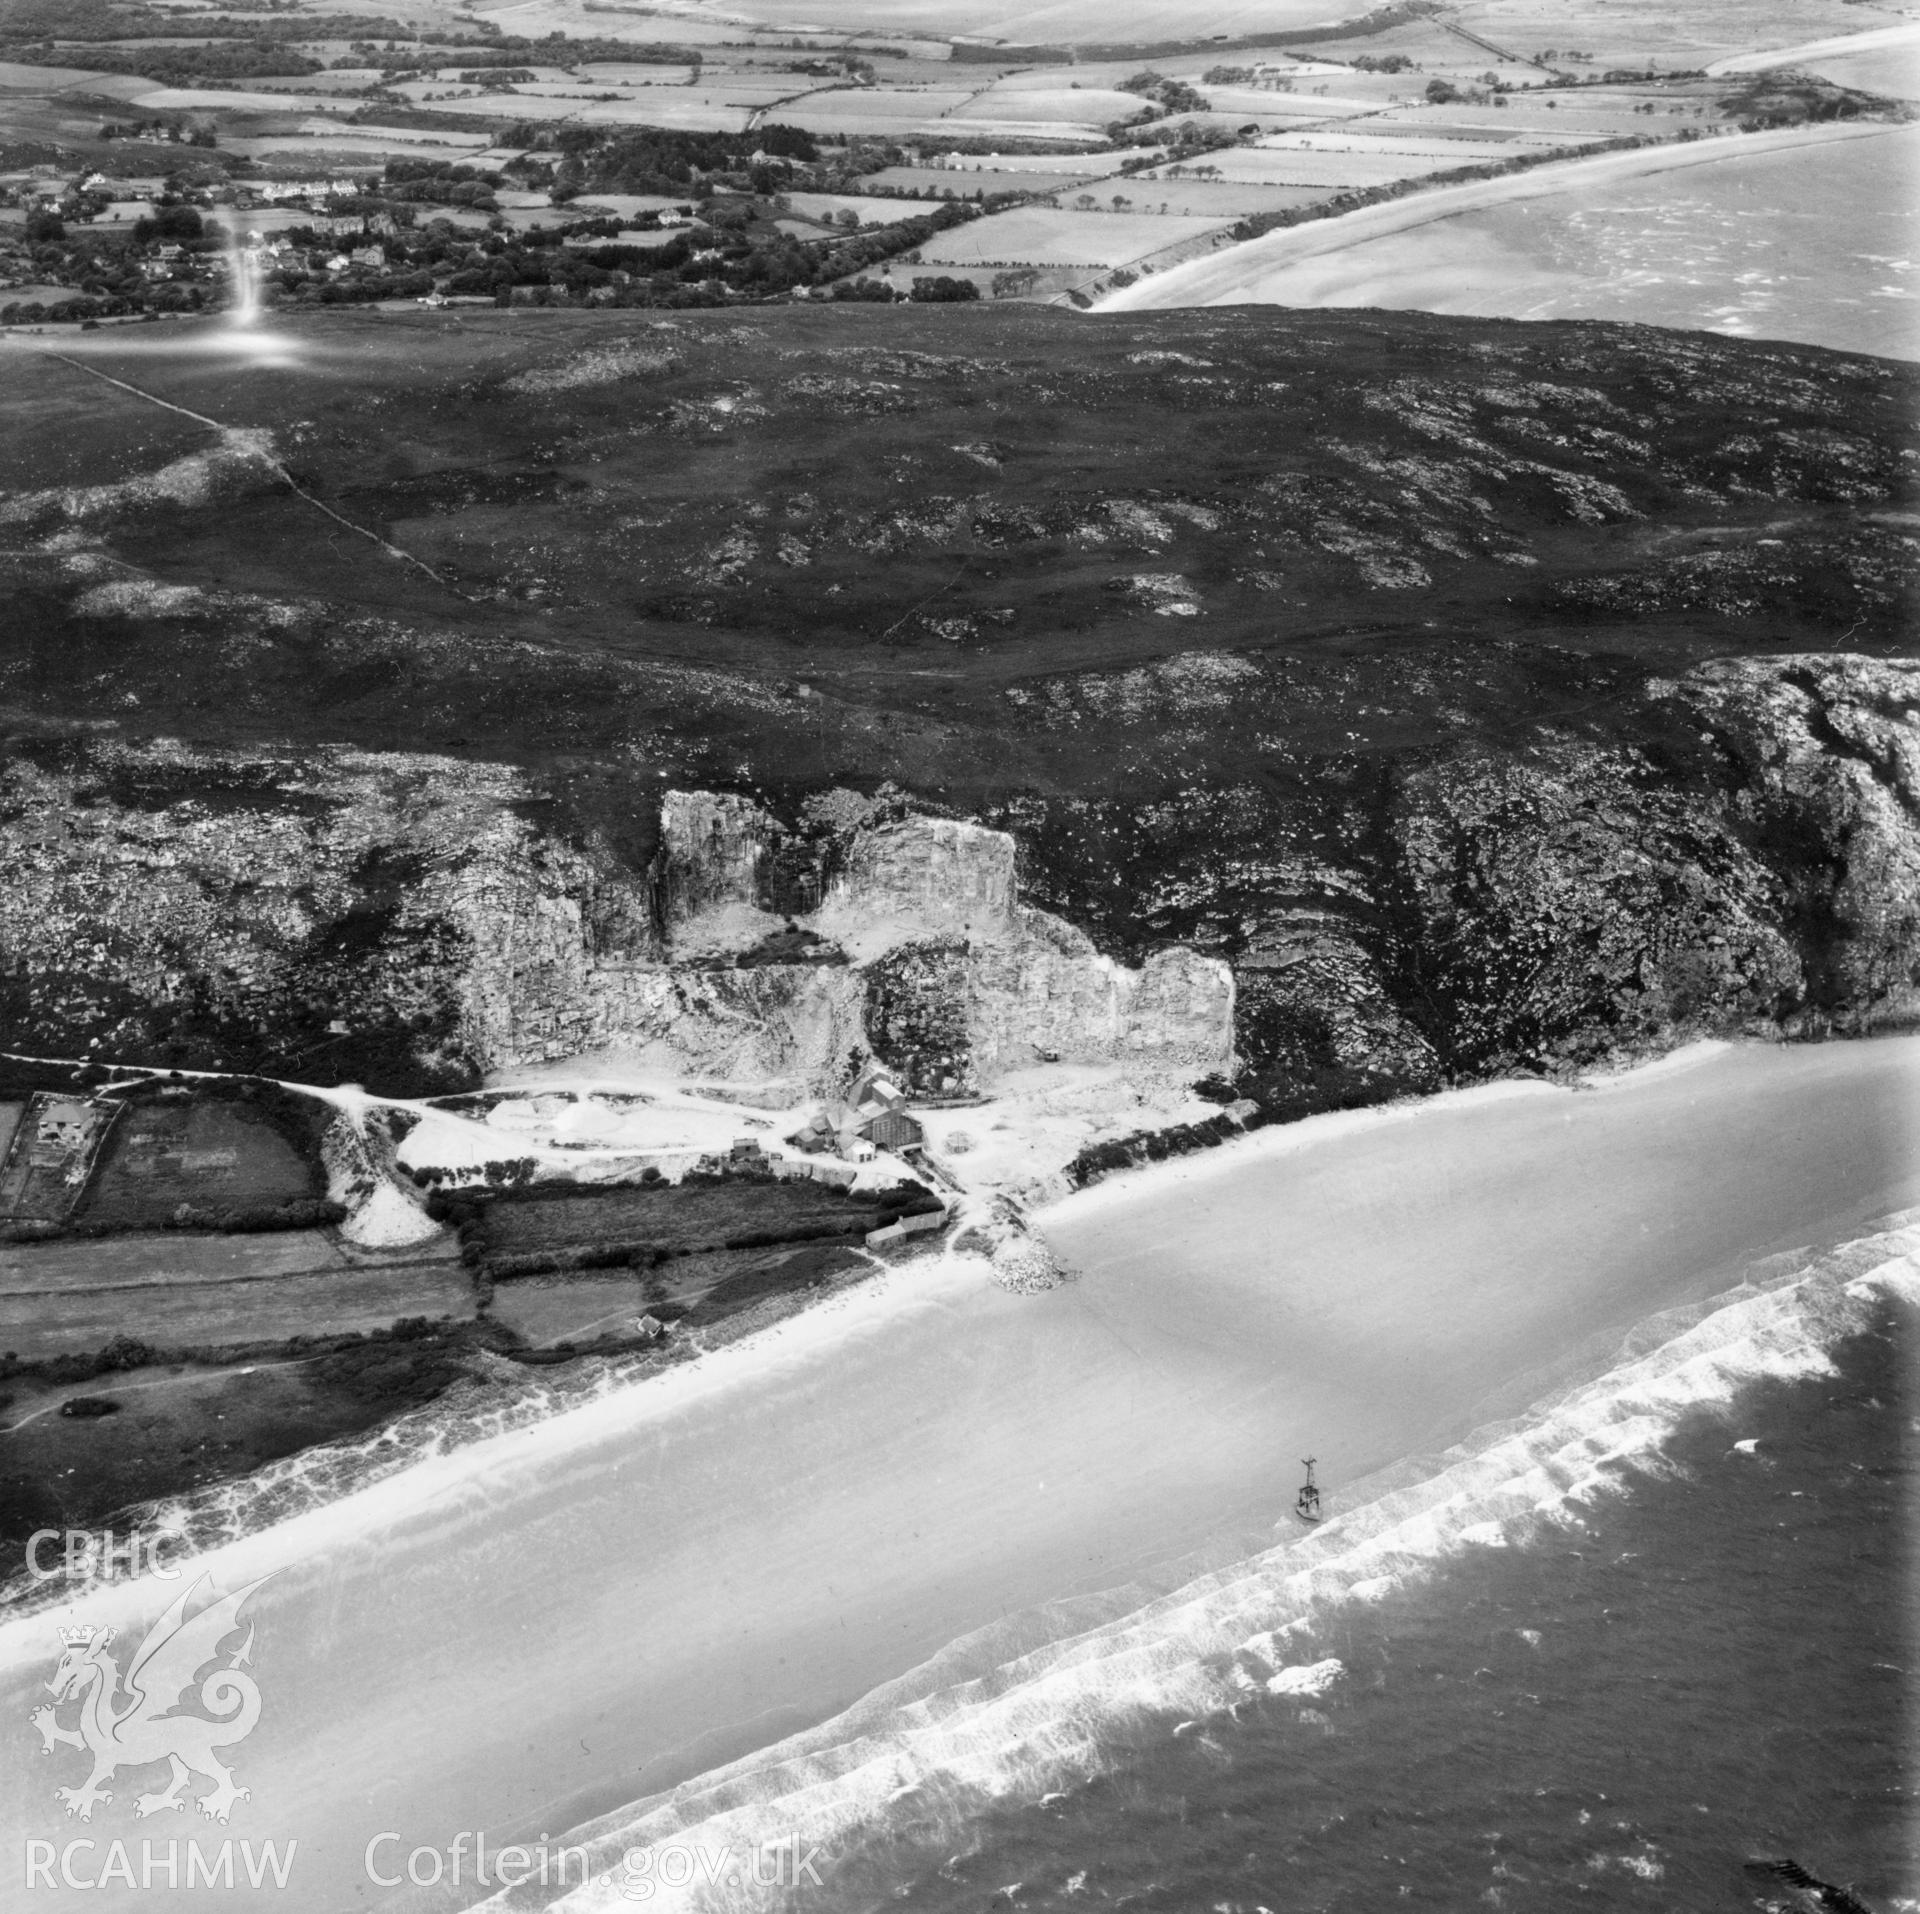 View of Llanbedrog quarry, showing aerial ropeway, commissioned by Cawood Wharton & Co. Ltd.. Oblique aerial photograph, 5?" cut roll film.